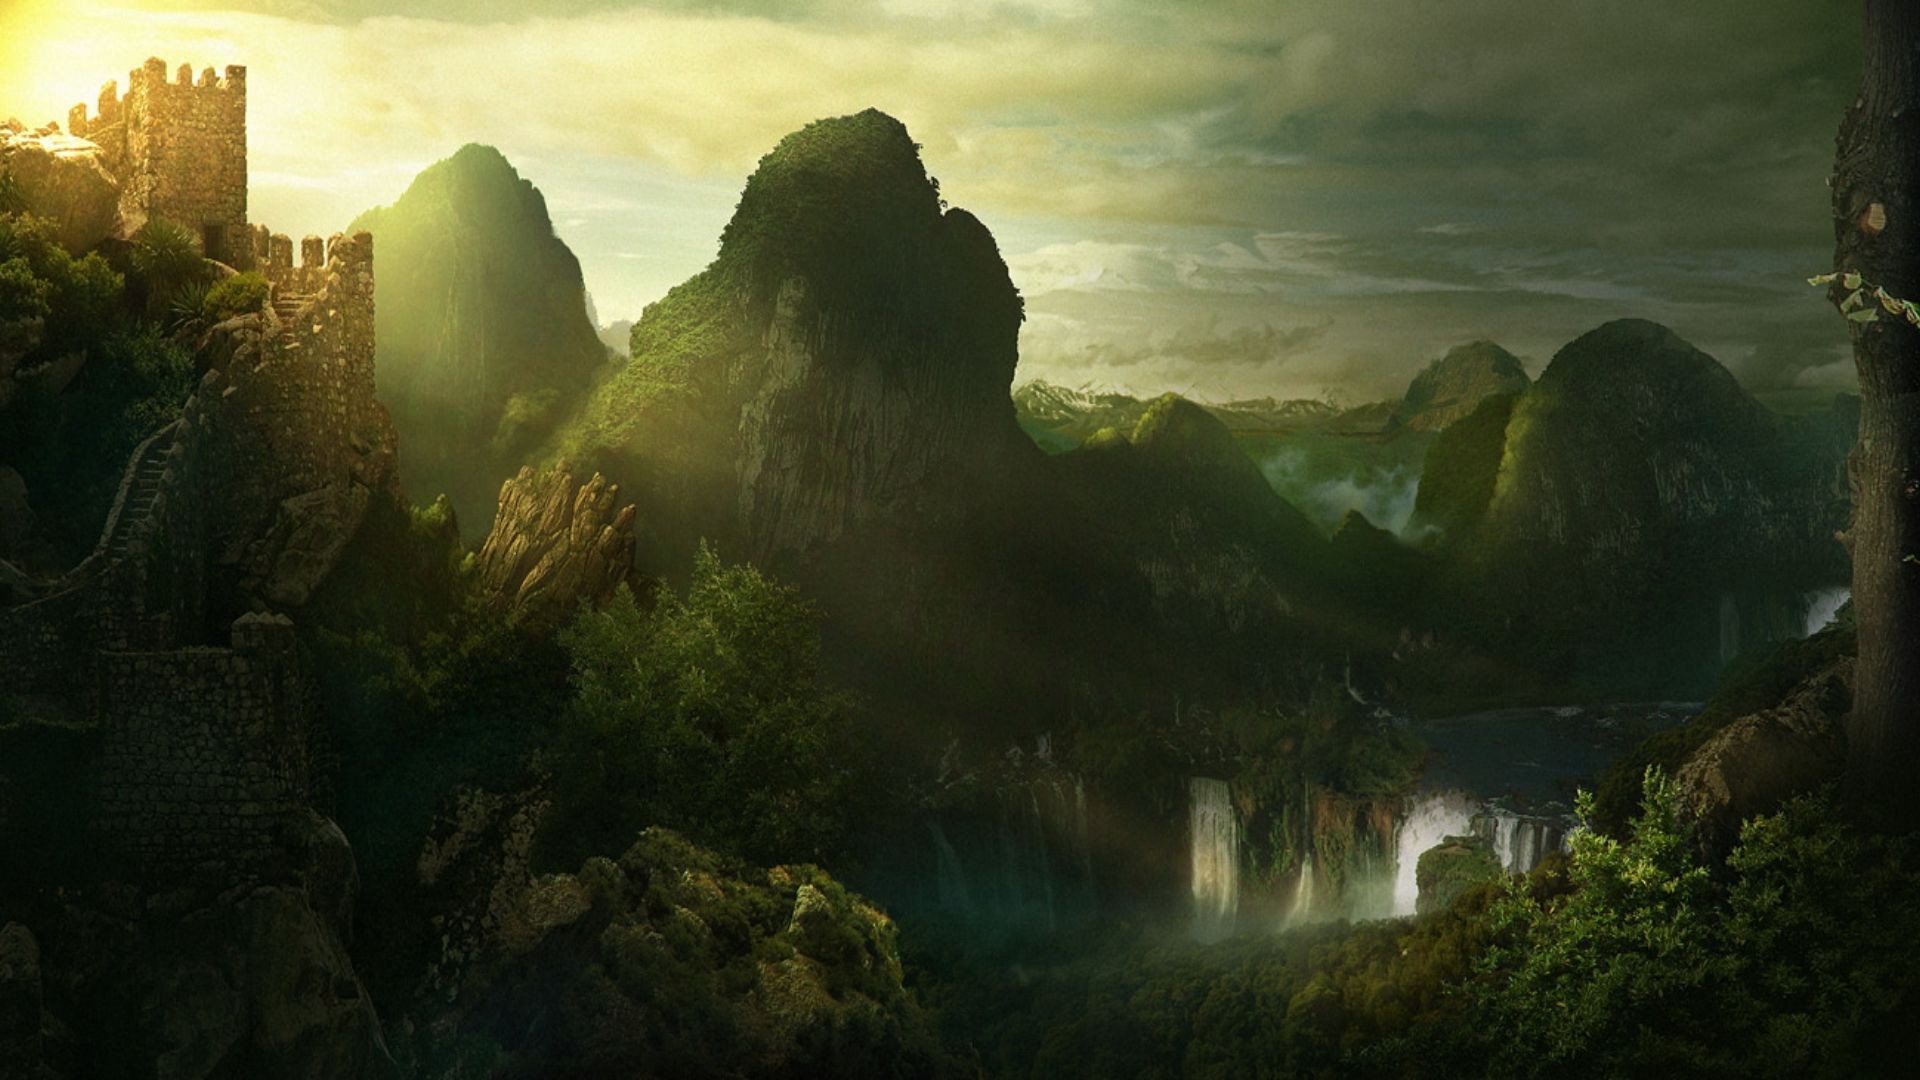 Free Download Wallpaper 1920x1080 Fantasy Mountains Landscapes